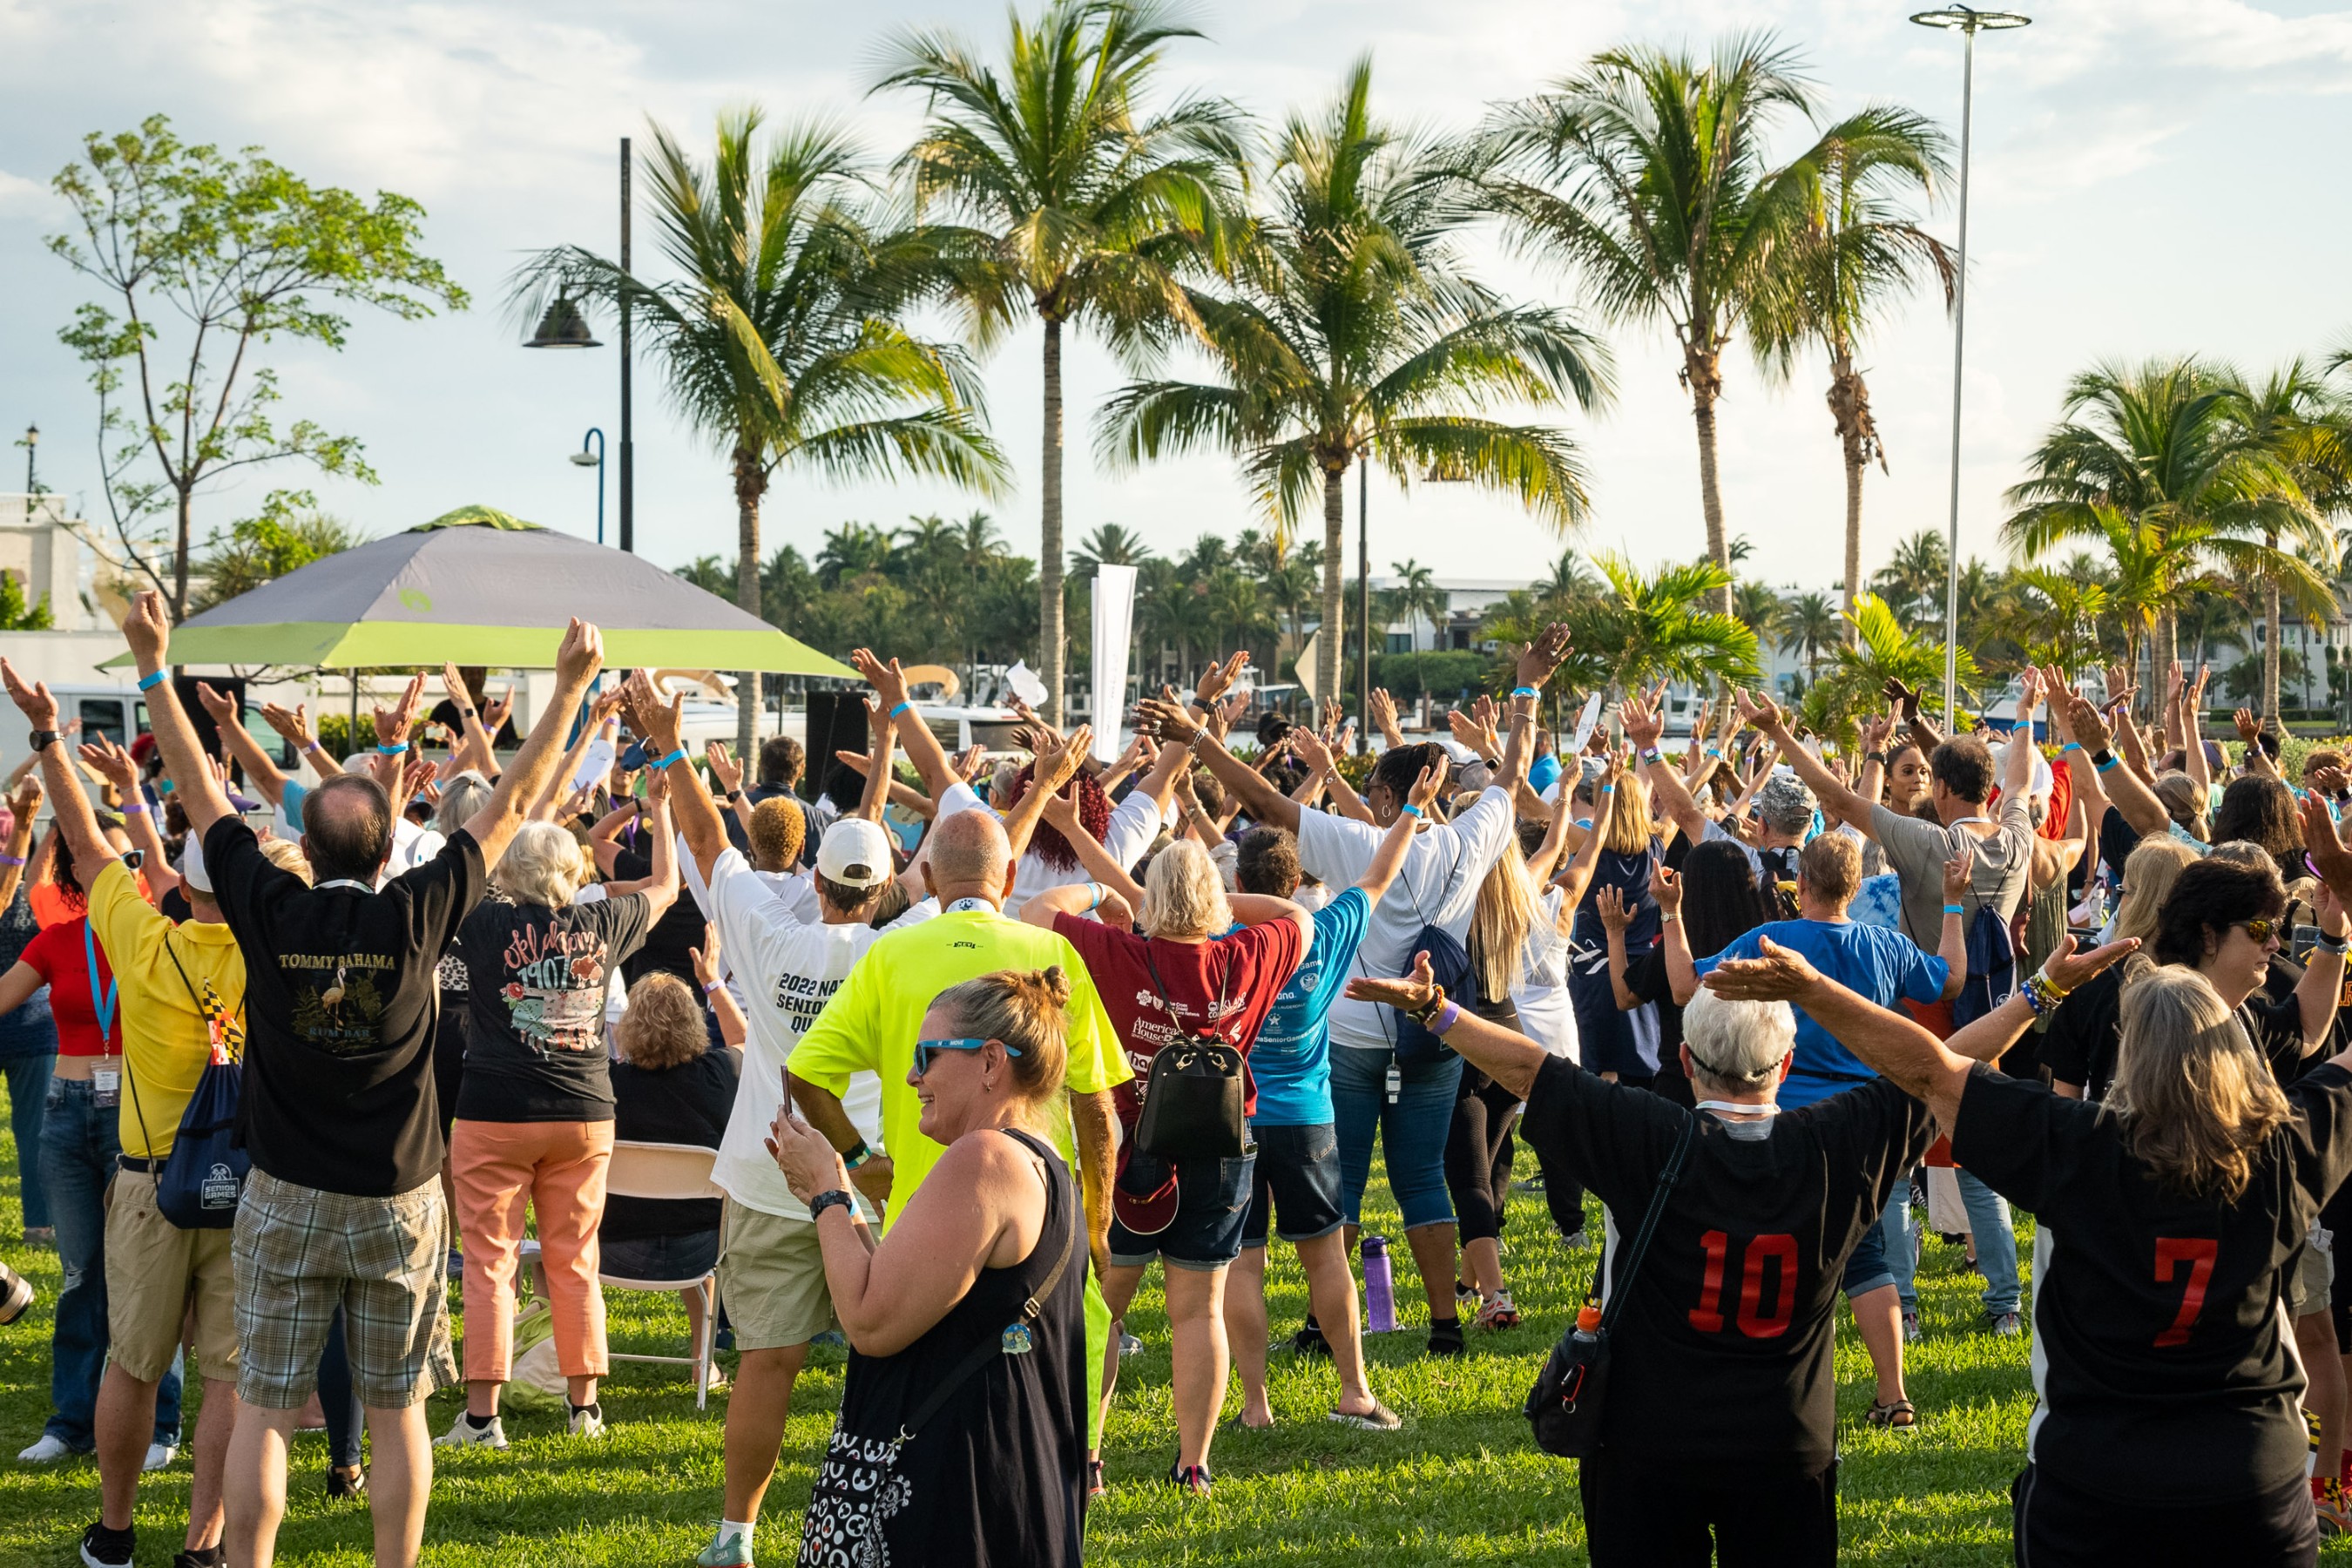 Participants compete in the GUINNESS WORLD RECORDS™ attempt for the Largest Game of Freeze Dance, sponsored by Pacira BioSciences, Inc. during the 2022 National Senior Games in Fort Lauderdale, Florida